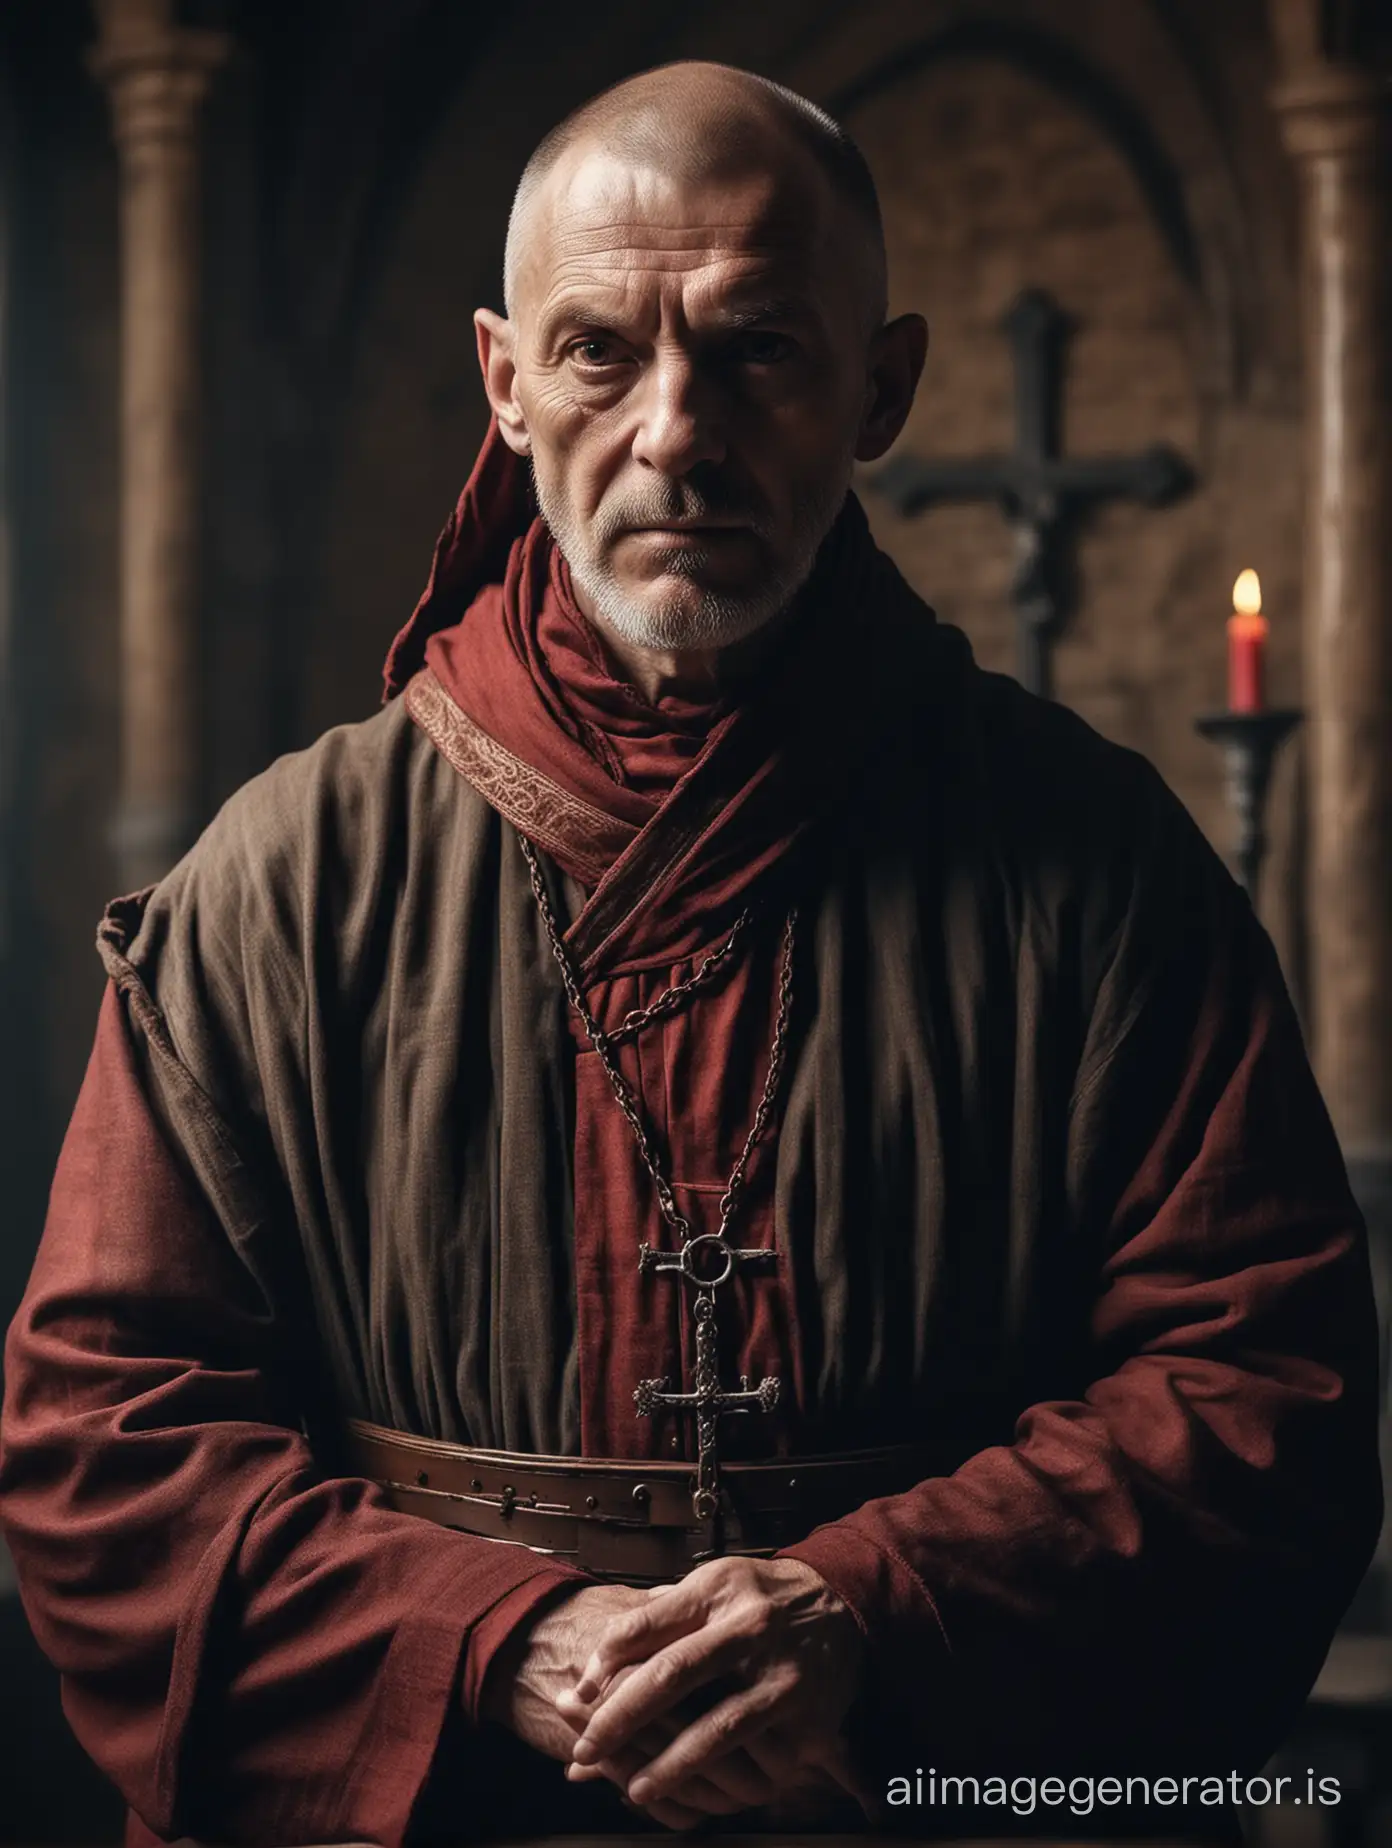 Medieval-Inquisitor-Monk-Portrait-with-a-Bloodthirsty-Aura